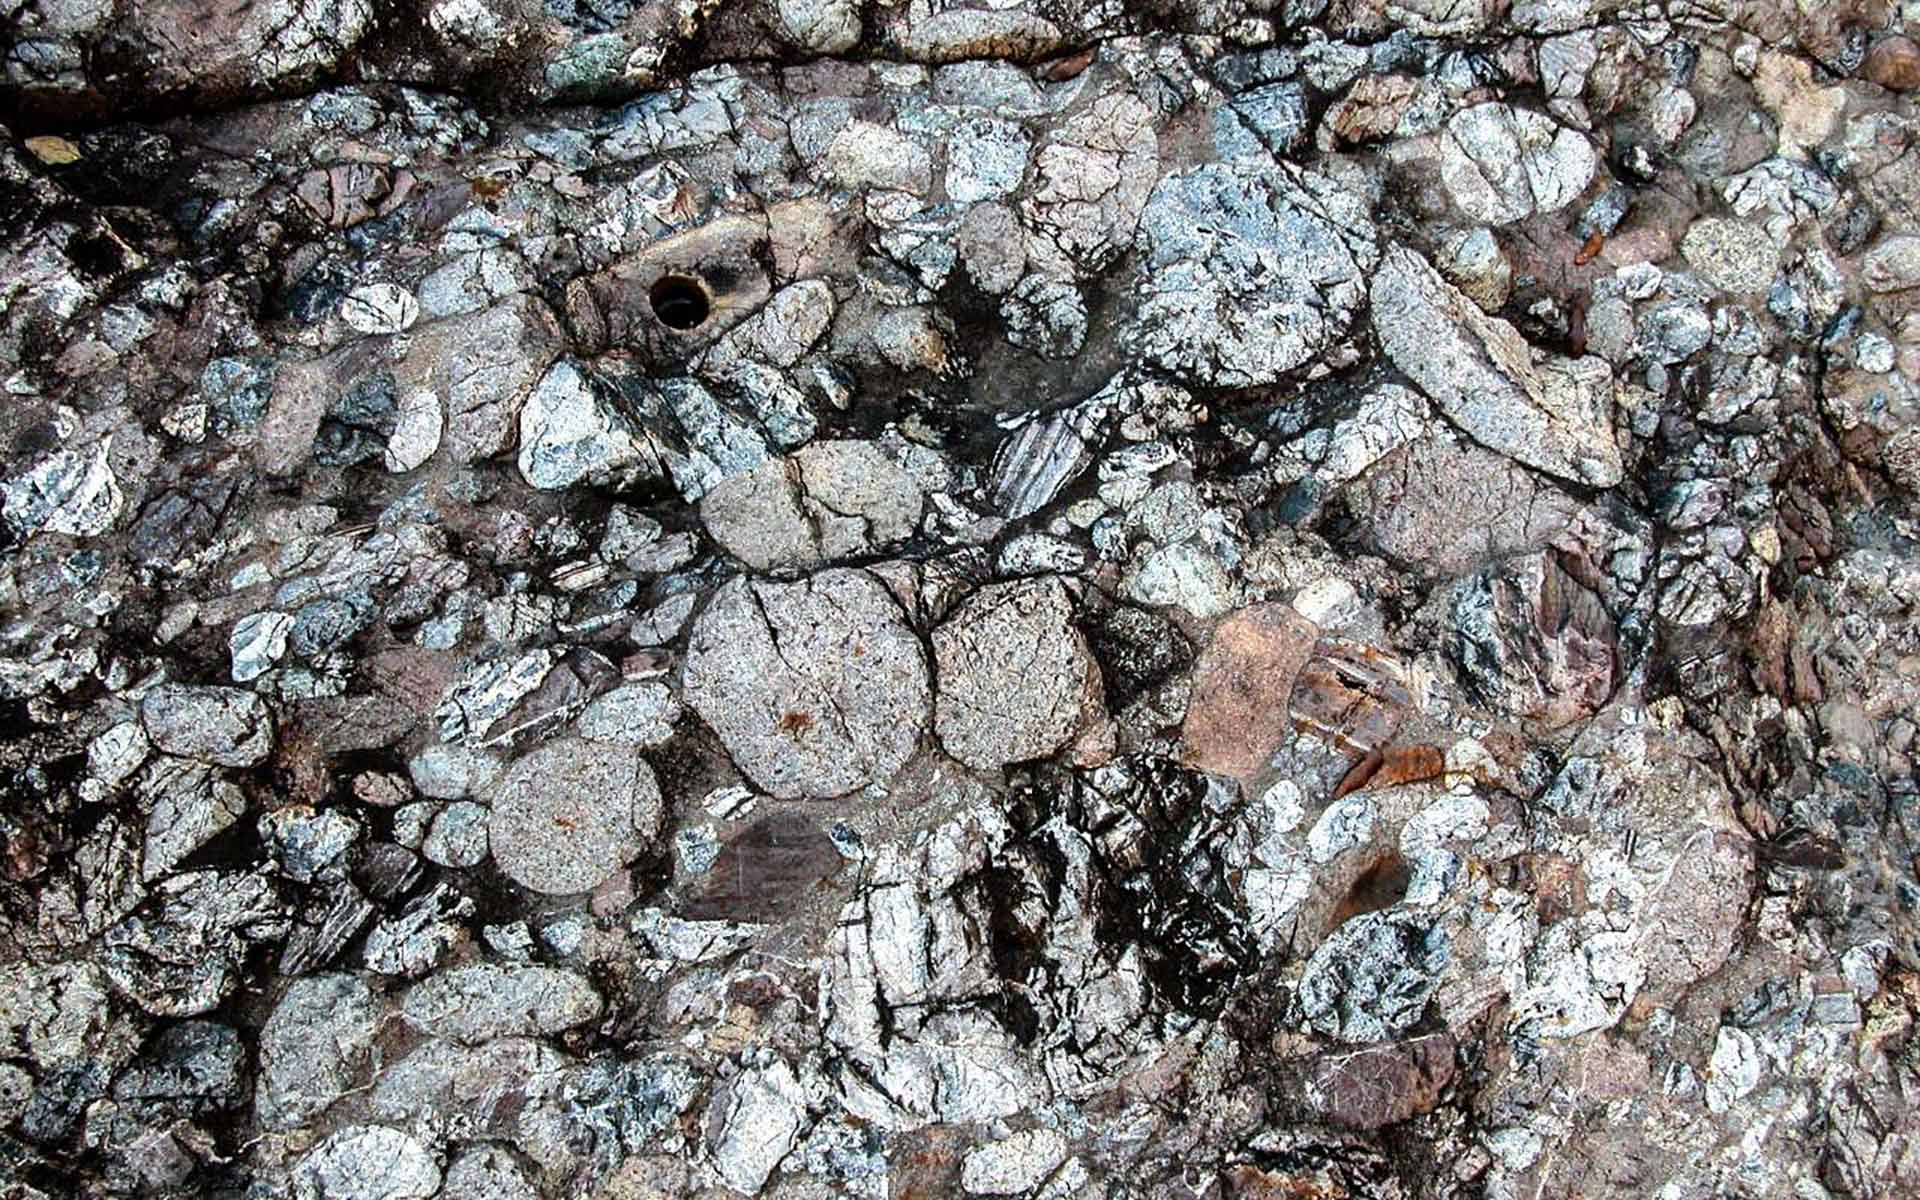 Moodies Group polymict conglomerate